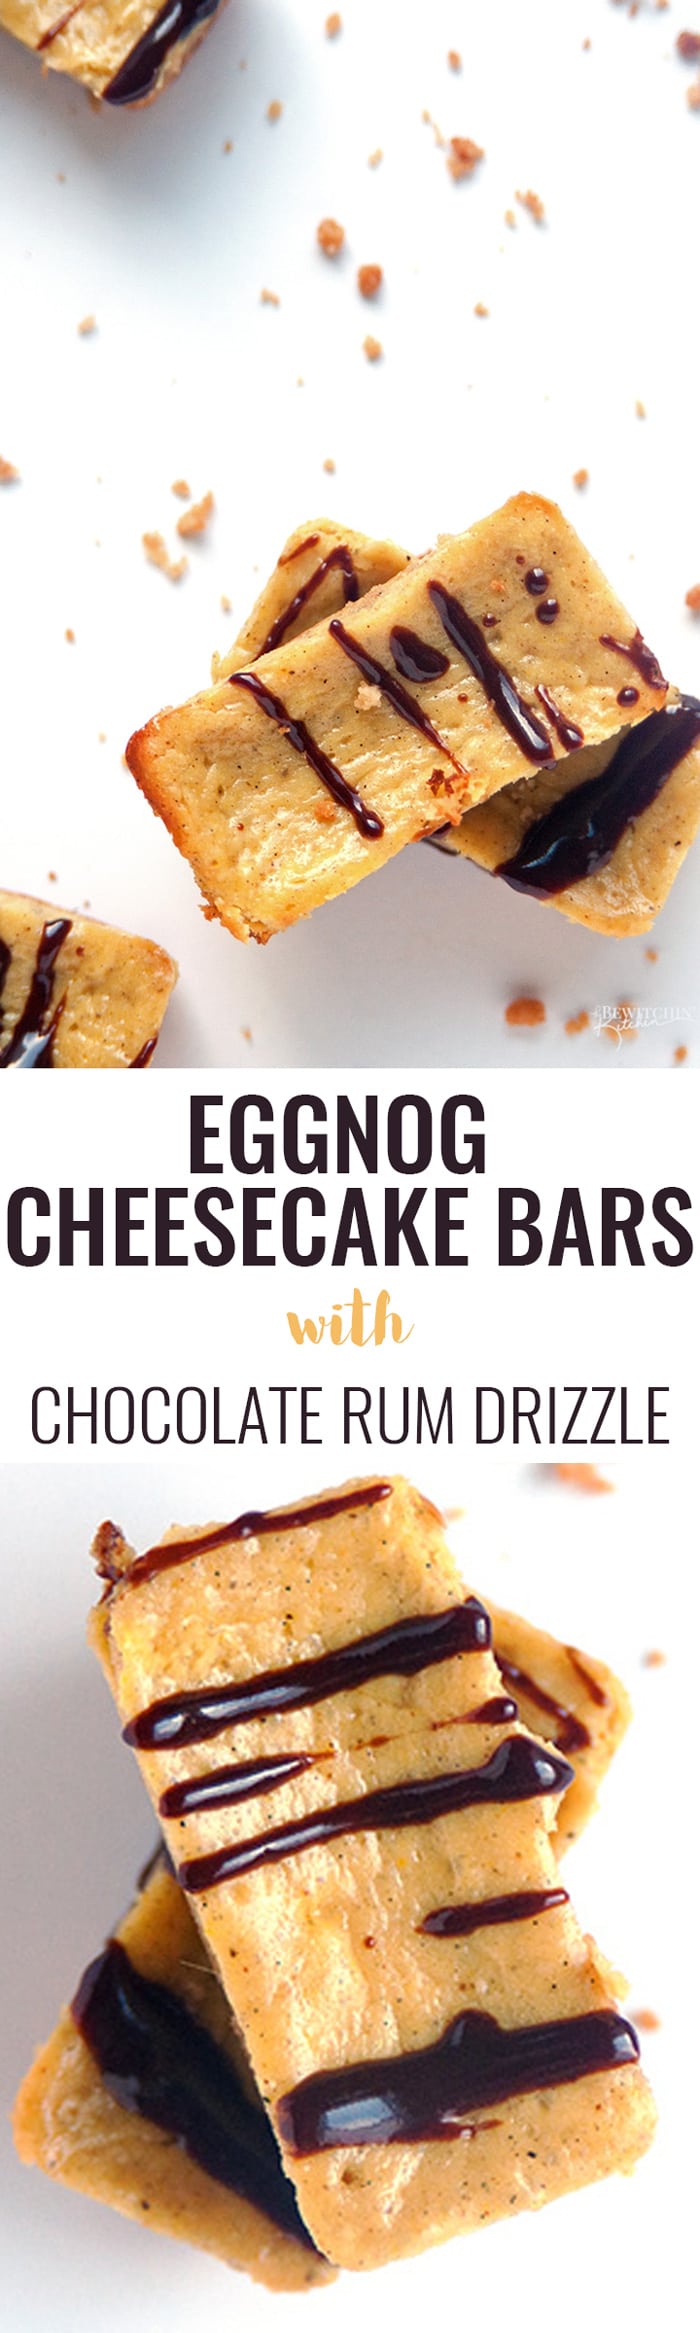 Eggnog Cheesecake Bars with a Chocolate Rum Drizzle - Oh my gosh! This recipe is simple and easy to make and is an Epicure favorite of mine. Perfect for Christmas parties| thebewitchinkitchen.com